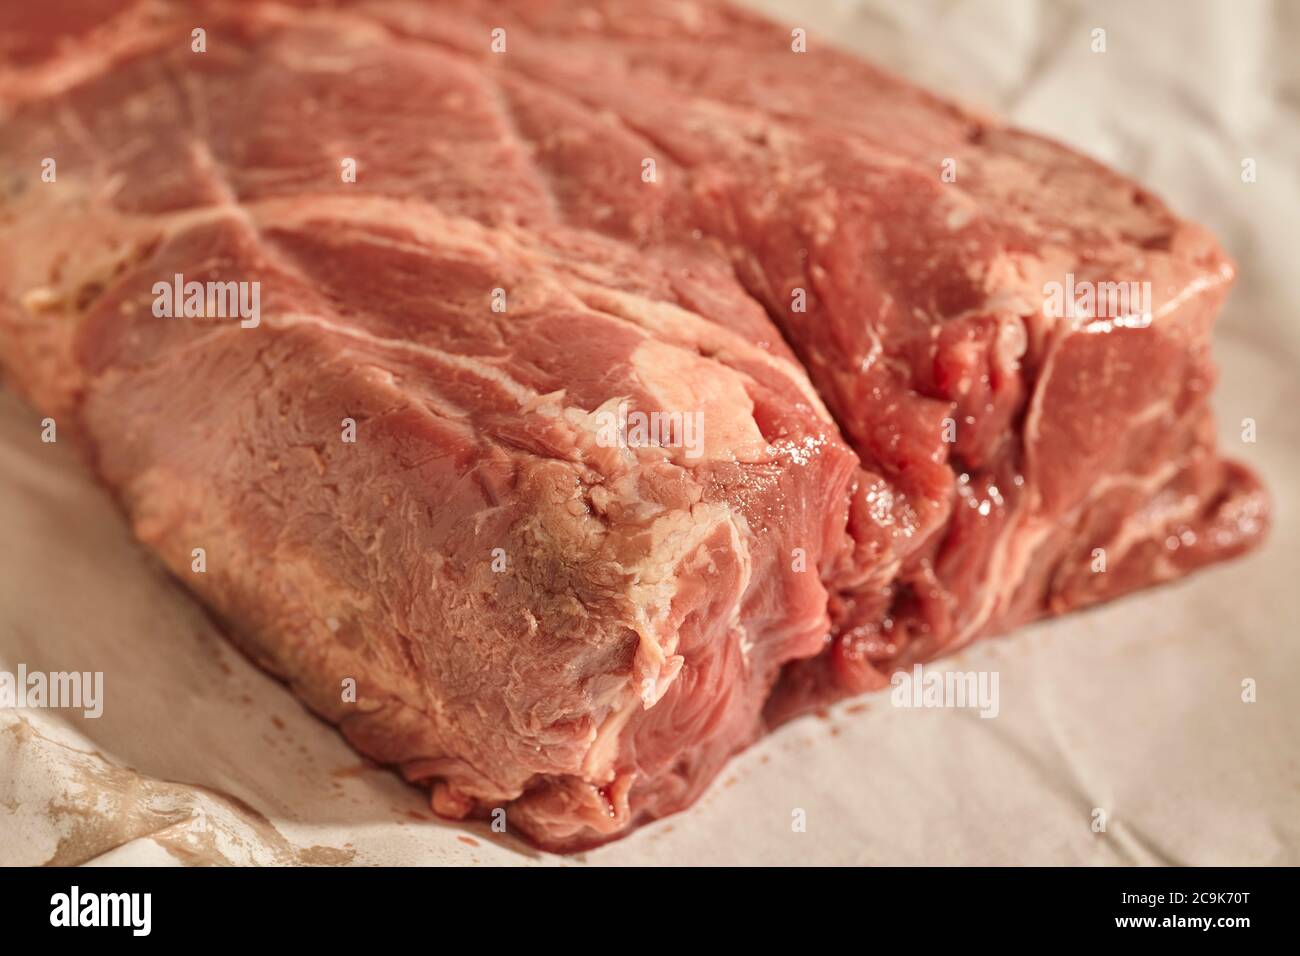 A raw, fresh chuck roast of beef from an artisan butcher in central Pennsylvania, USA. This is sometimes called 'stewing steak.' Stock Photo